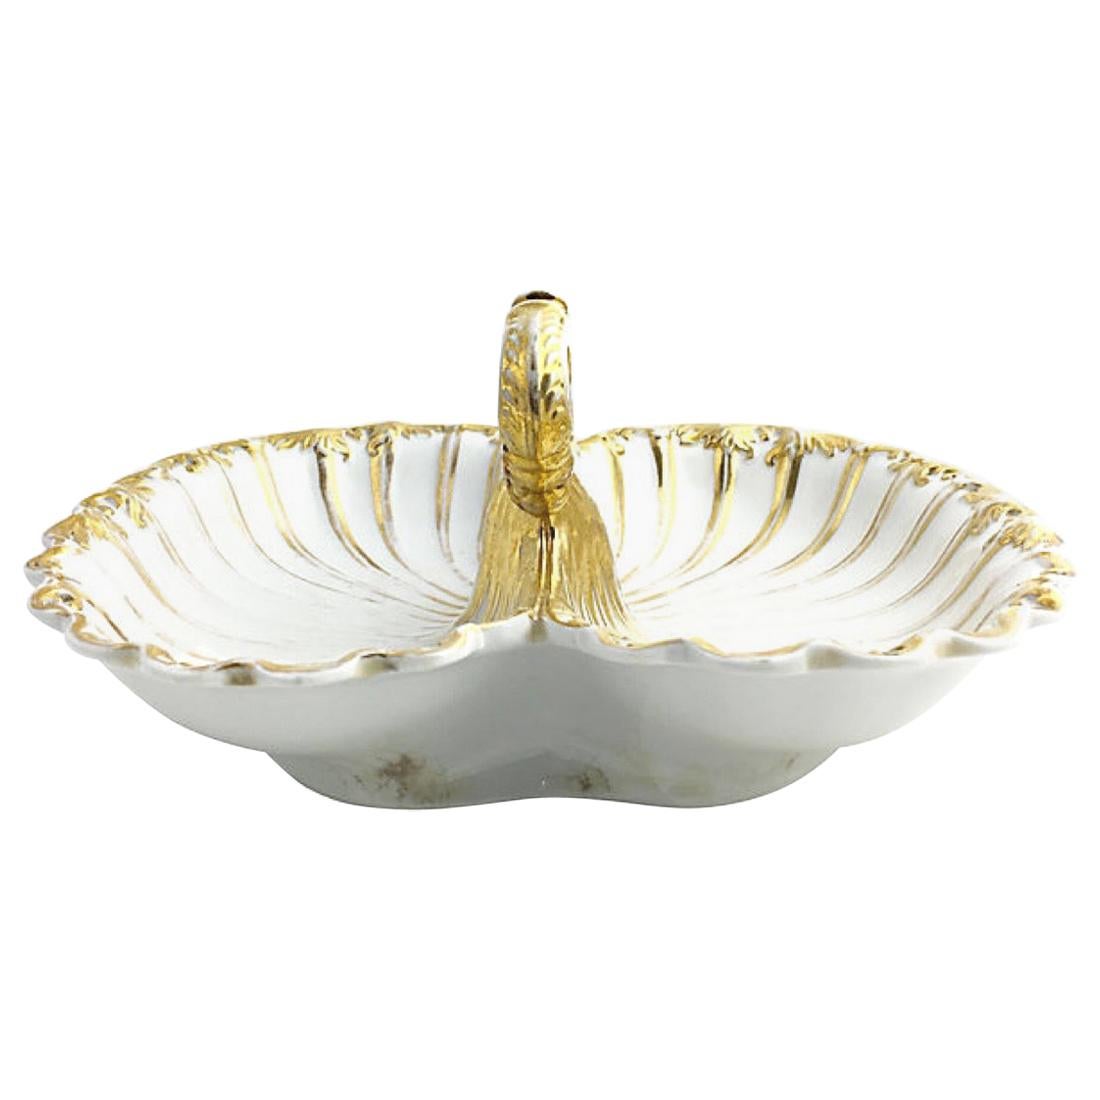 Antique Gilt Divided Shell Serving Dish with Handle by Moabit For Sale